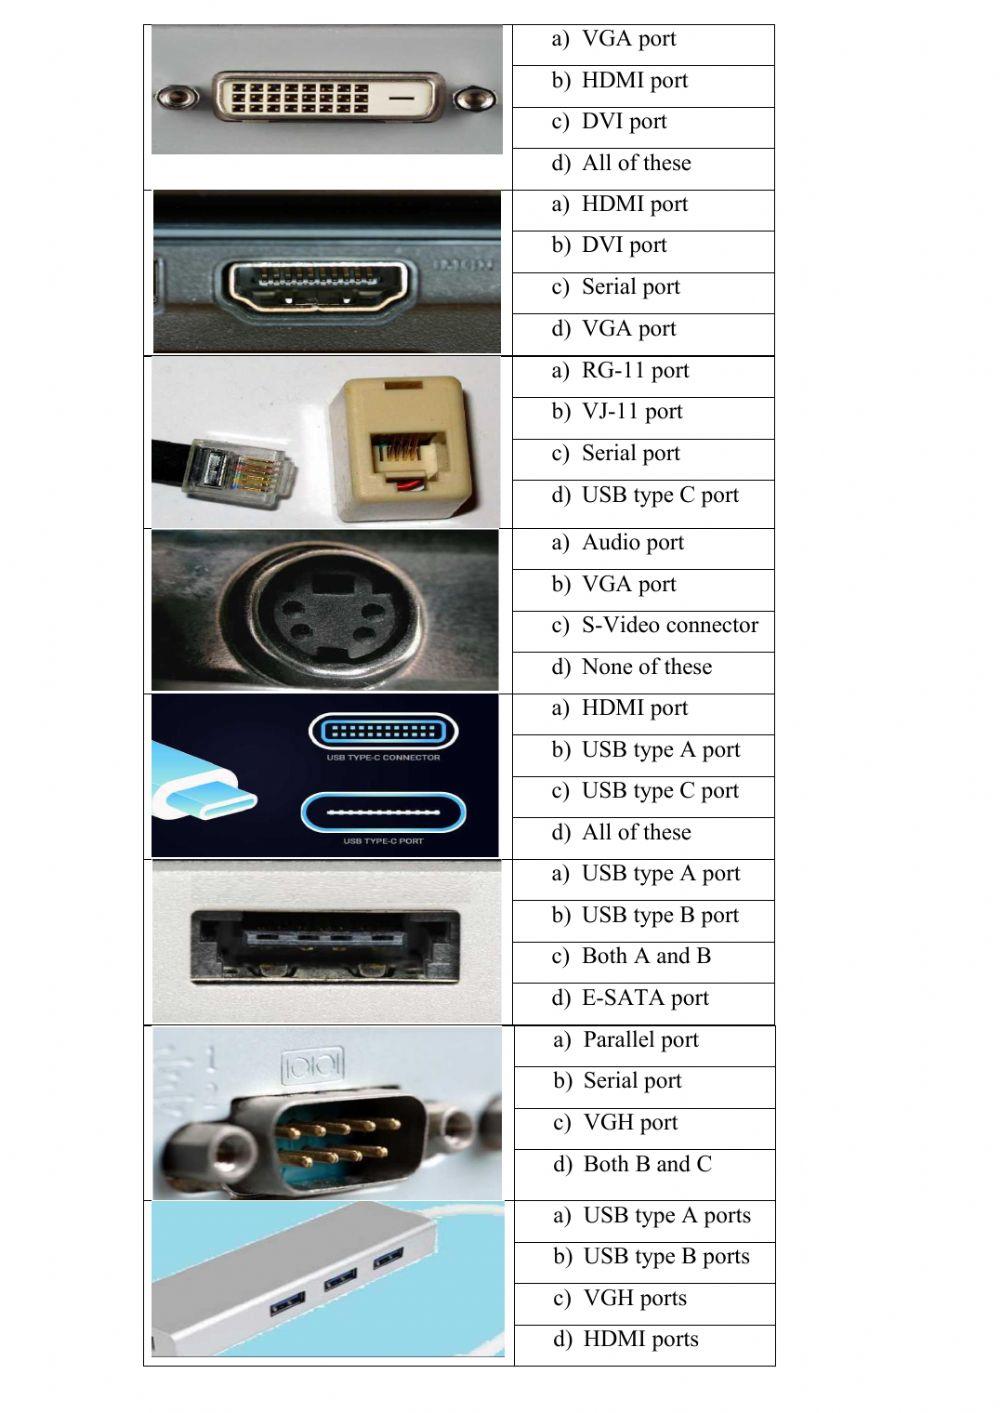 Ports and Connectors